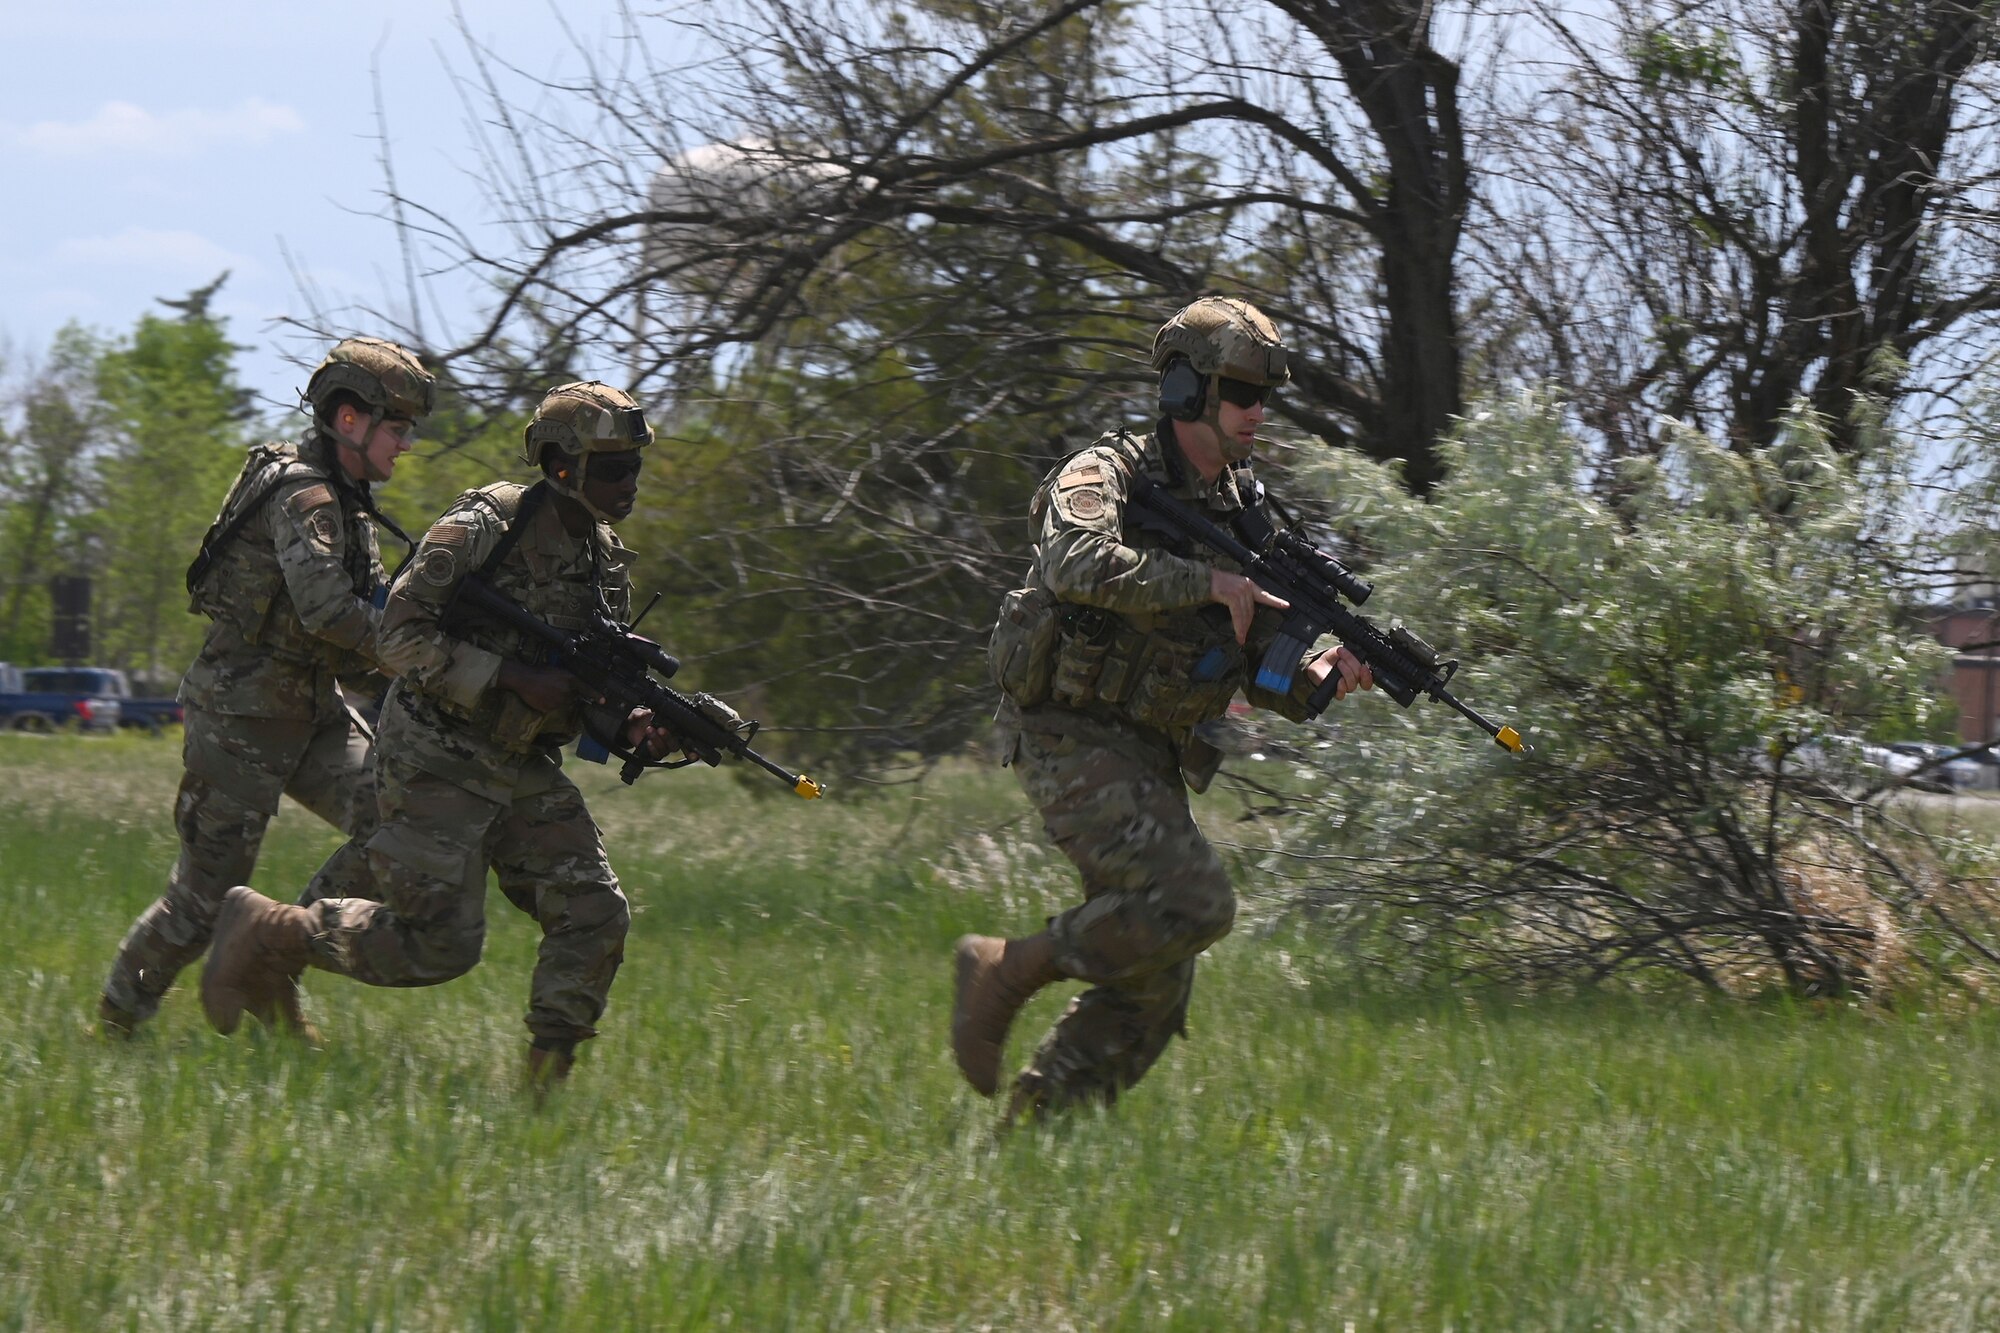 Three North Dakota Air National Guard 219th Security Forces Squadron members in uniform with M4 rifles configured for training run to get into position for a training exercise at the Minot Air Force Base, N.D., June 24, 2021.